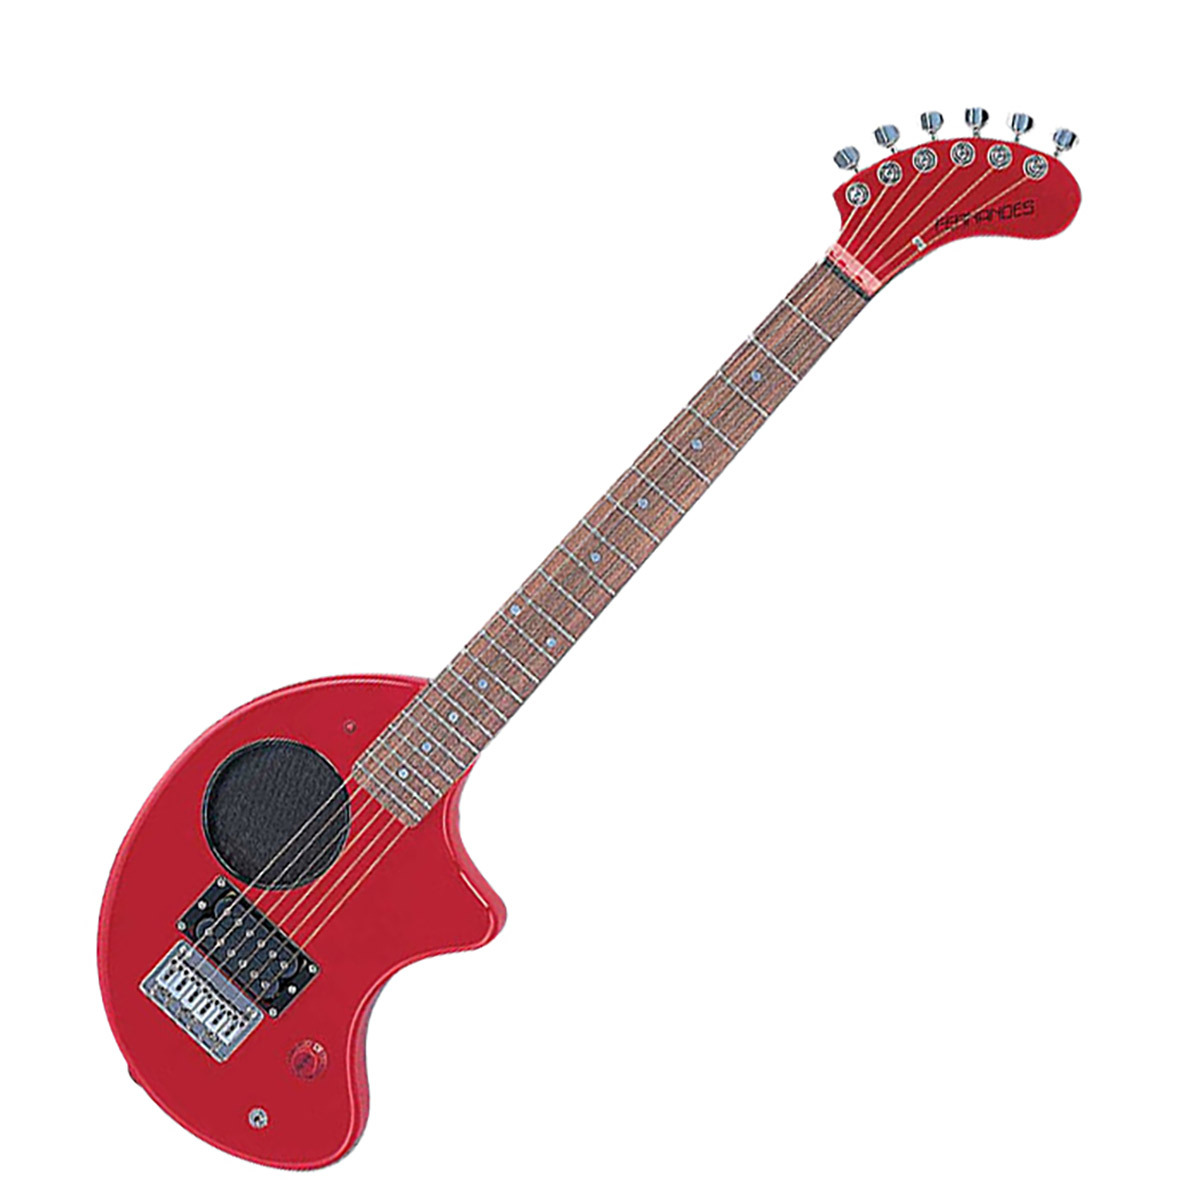 FERNANDES ZO-3 RED スピーカー内蔵ミニエレキギター レッド ソフト ...